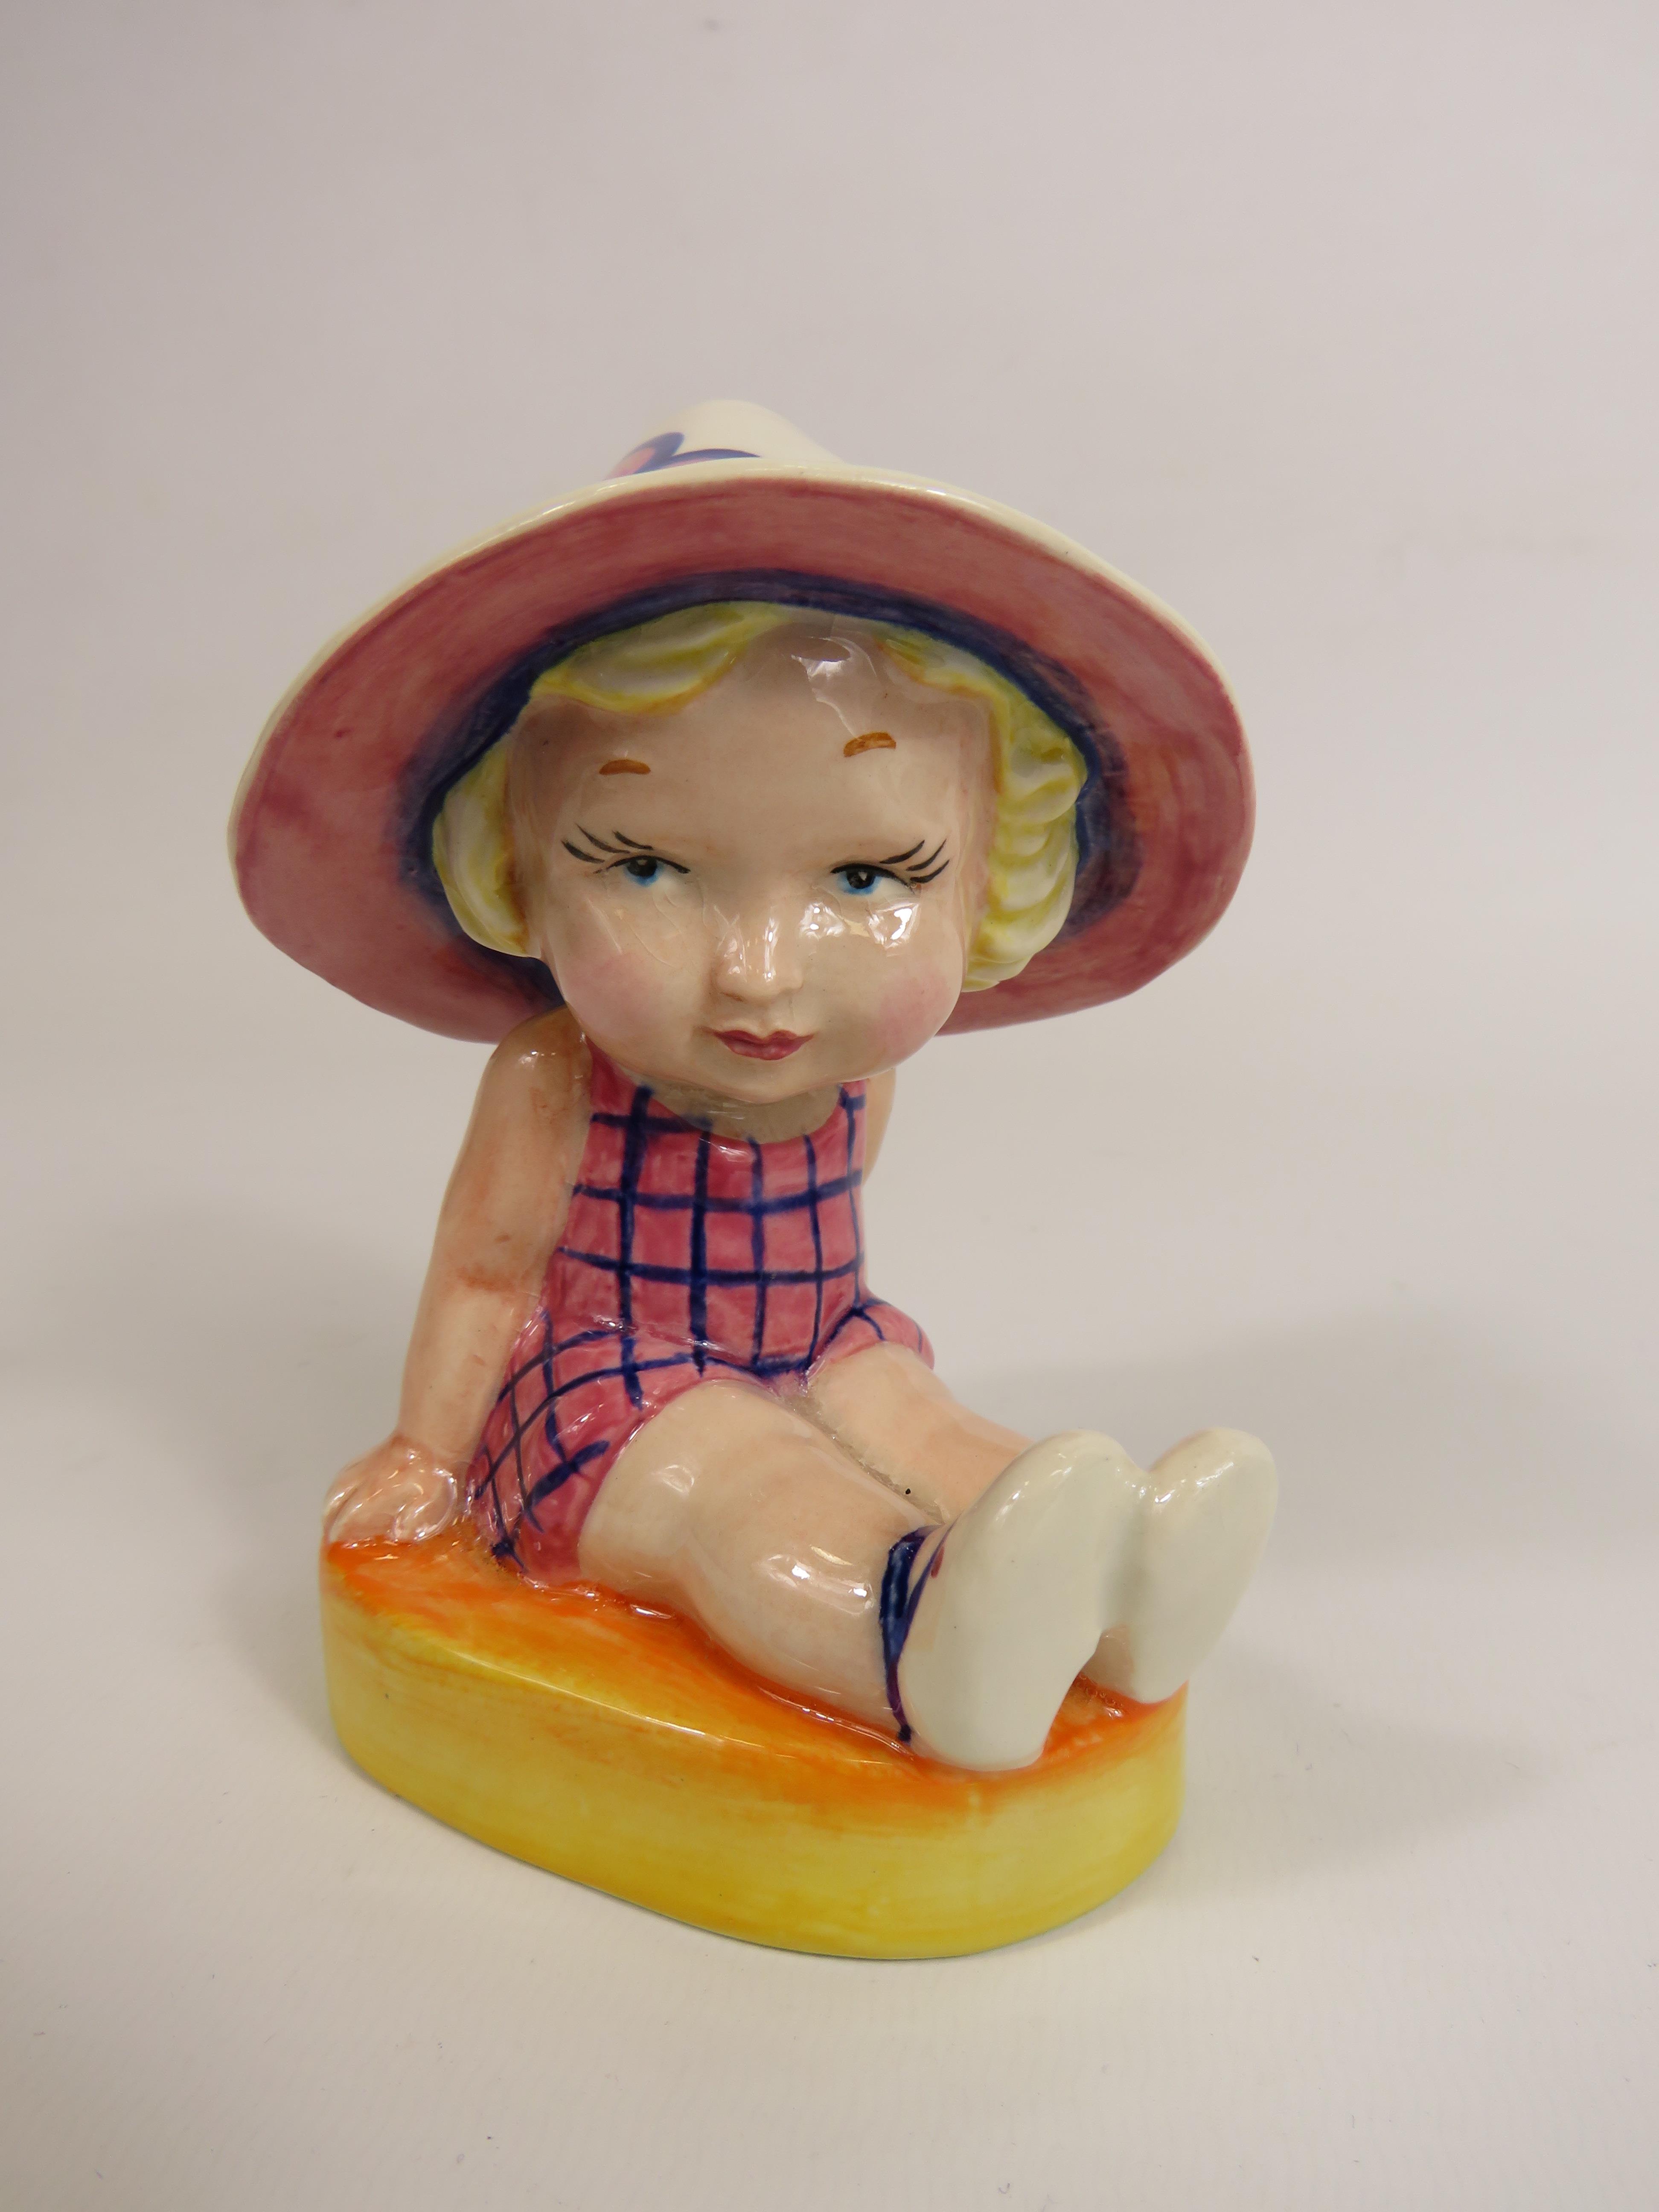 Lorna Bailey Art deco style figurine No 1 of 1, little girl seated wearing a sun hat. 13cm tall. - Image 2 of 7